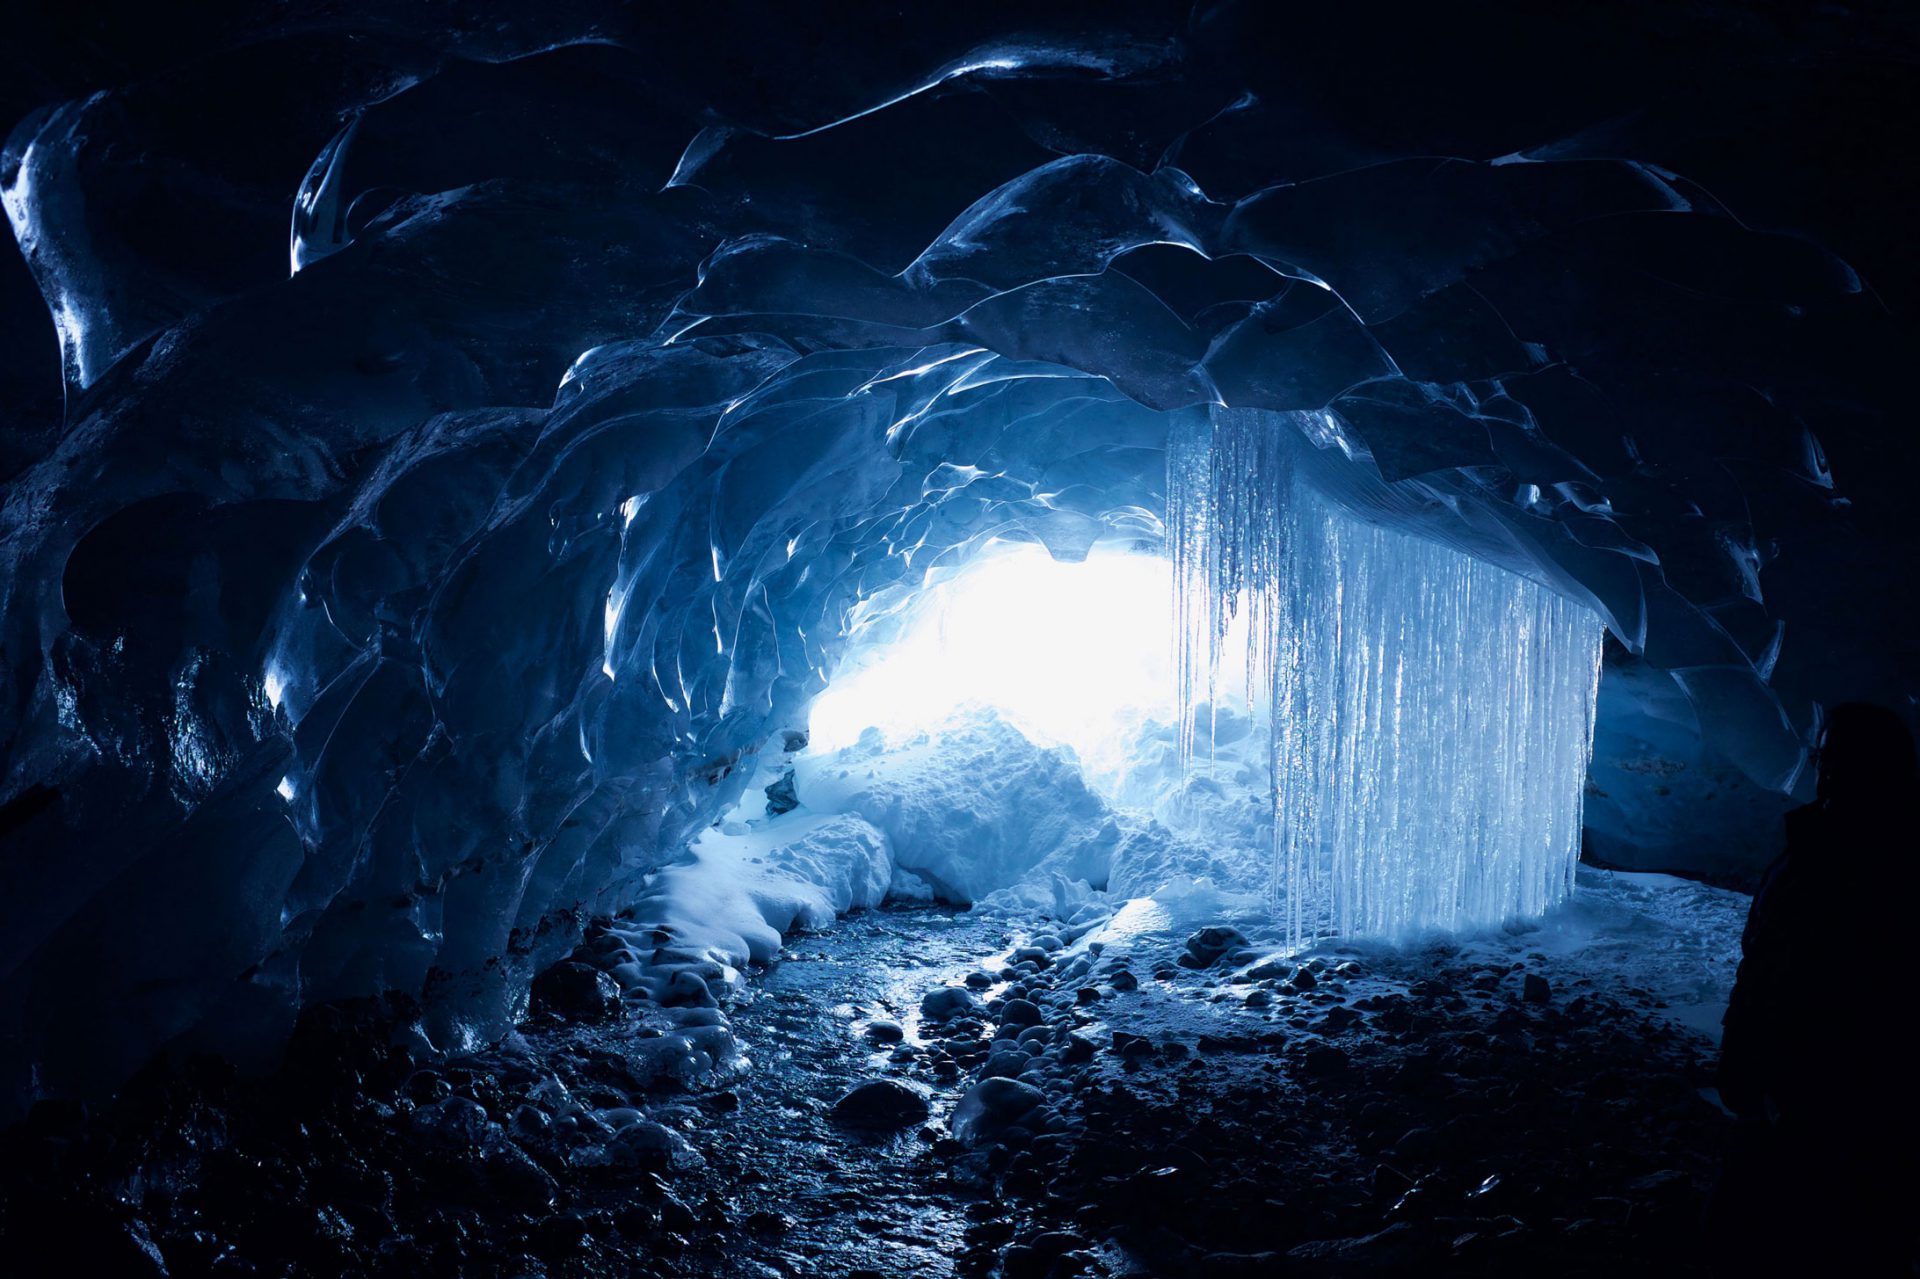 Gorgeous ice cave adventure near Vancouver, BC